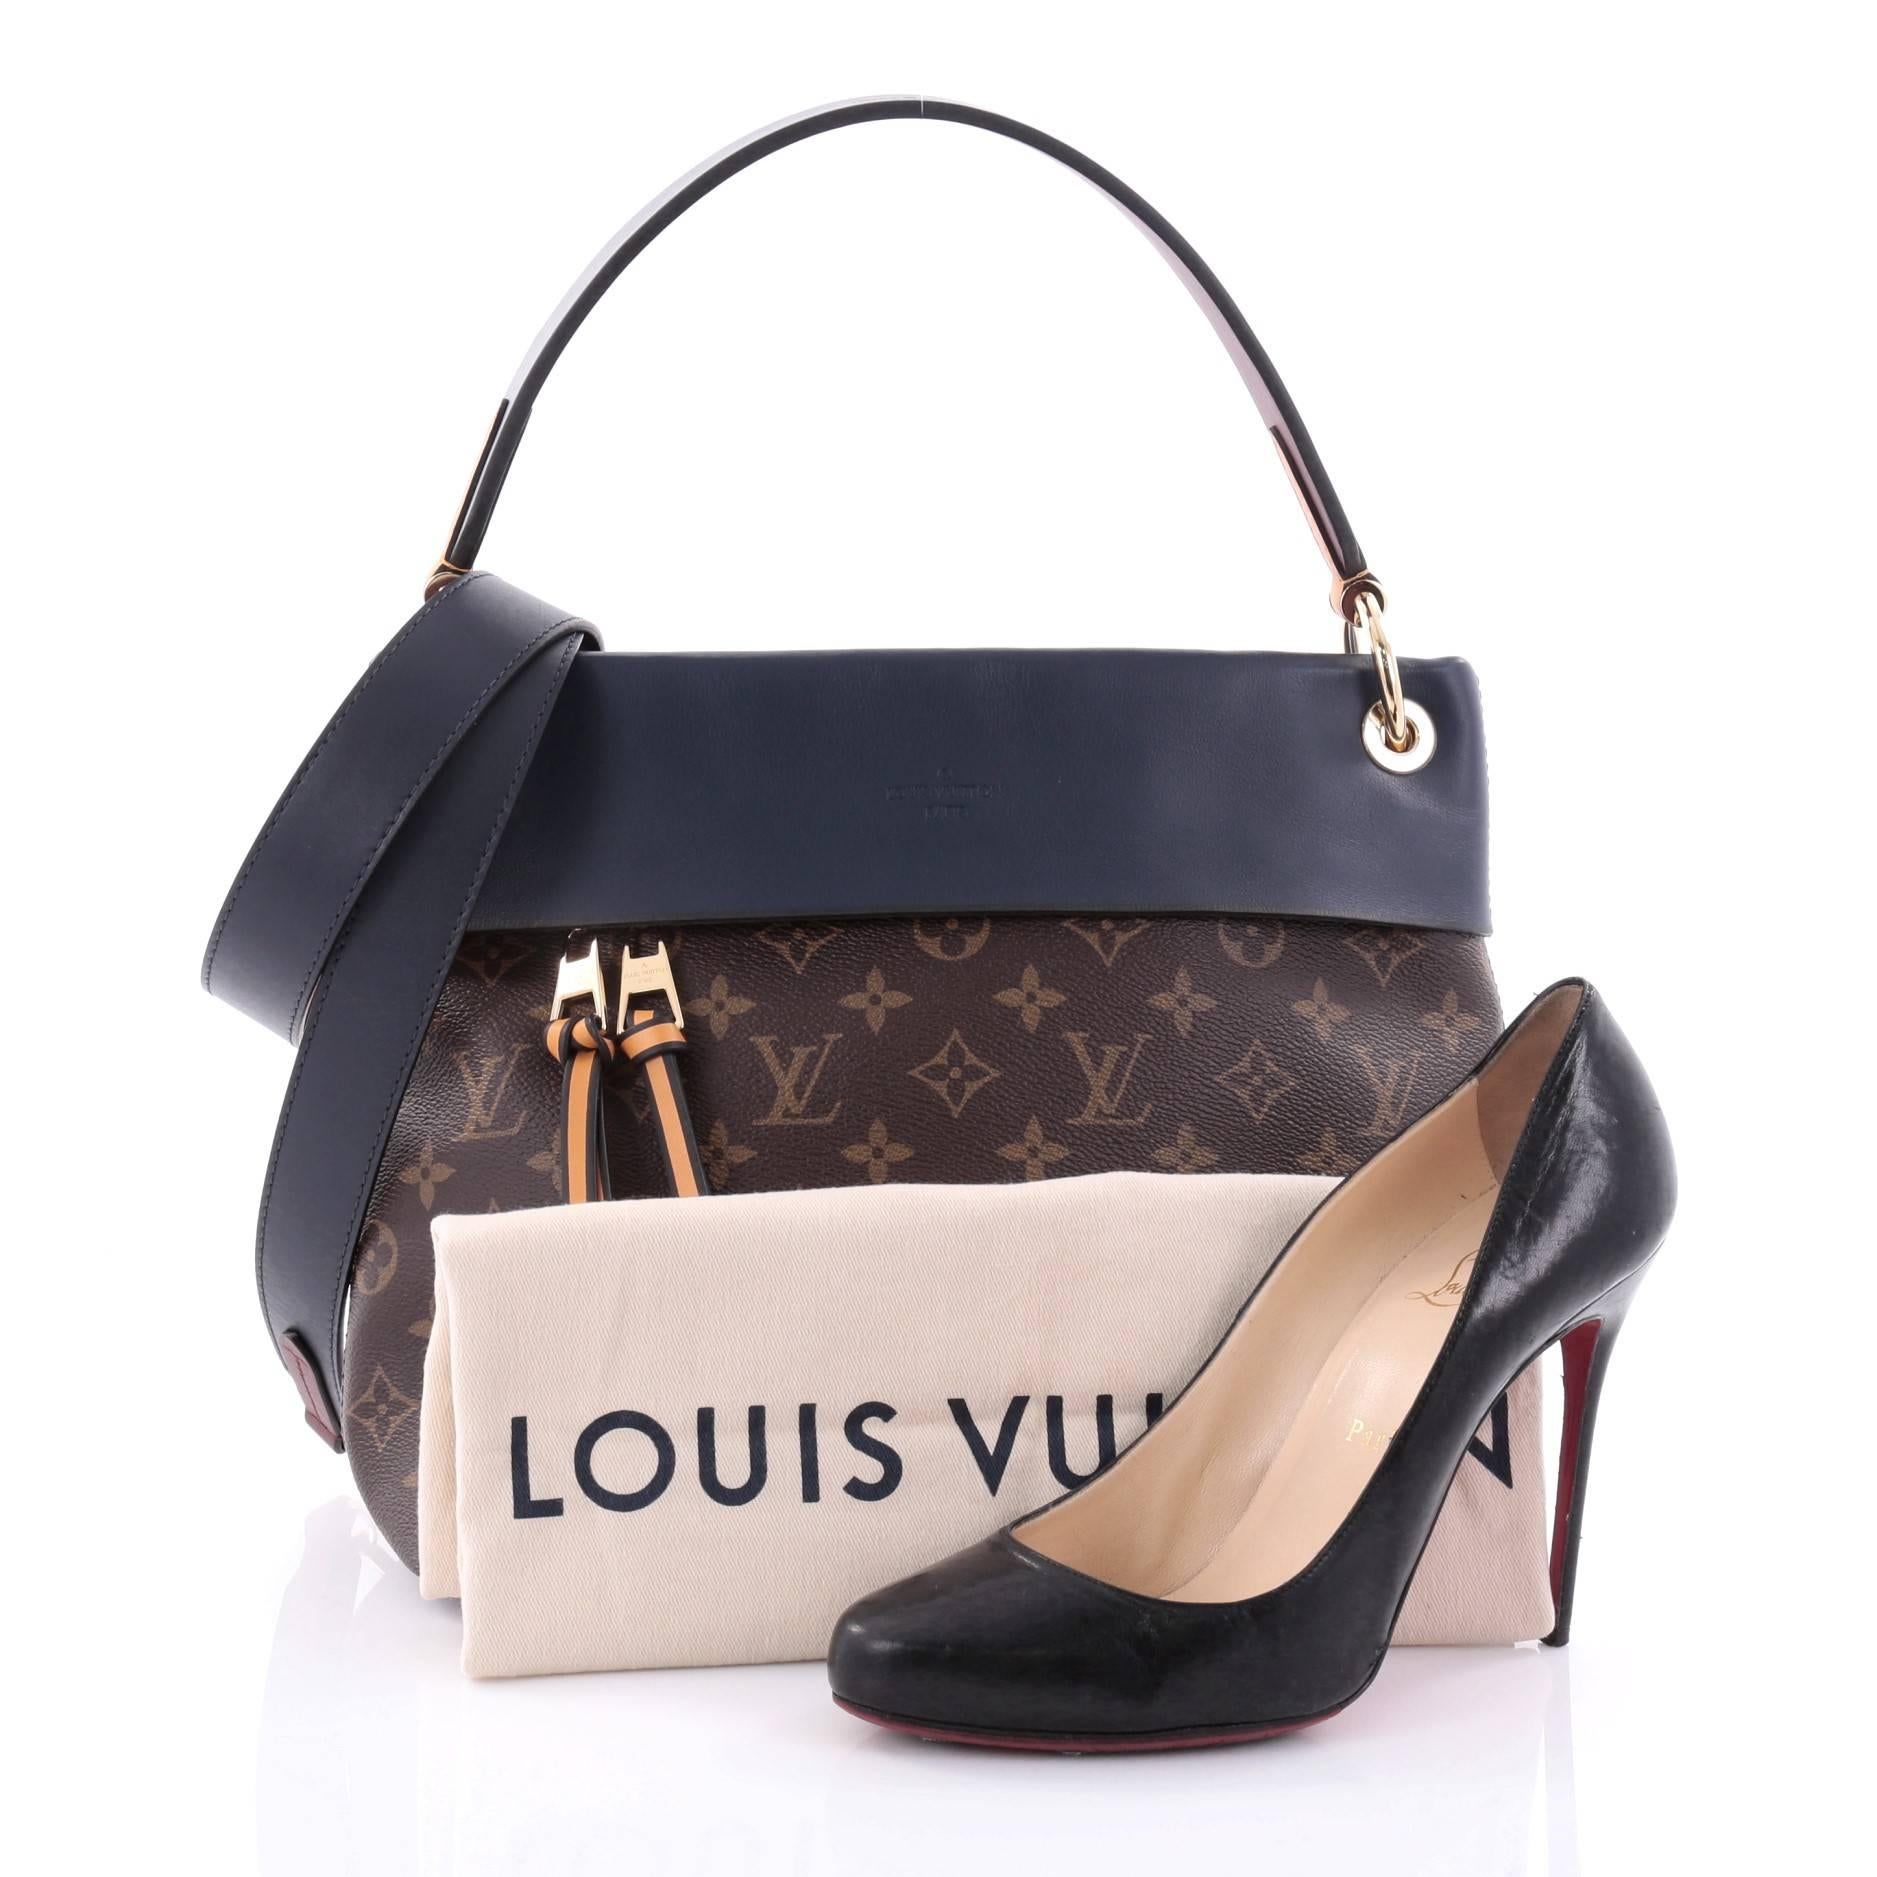 This authentic Louis Vuitton Tuileries Besace Bag Monogram Canvas with Leather was inspired by the Tuileries Gardens in Paris. Crafted from brown monogram coated canvas, this ultra functional bag features navy blue leather trims, flat leather